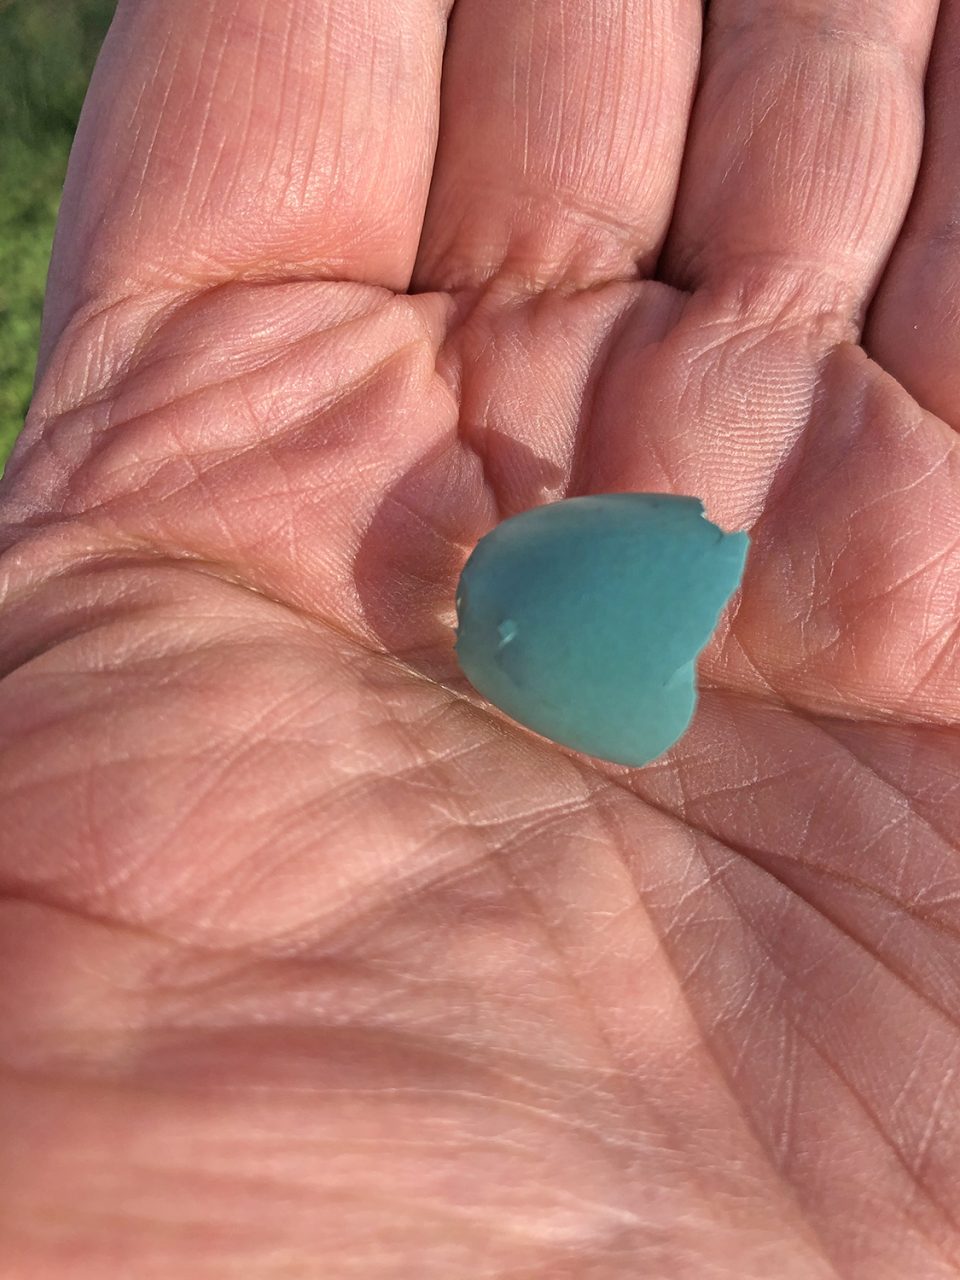 Just look at the vivid blue-green of this broken robin's egg.